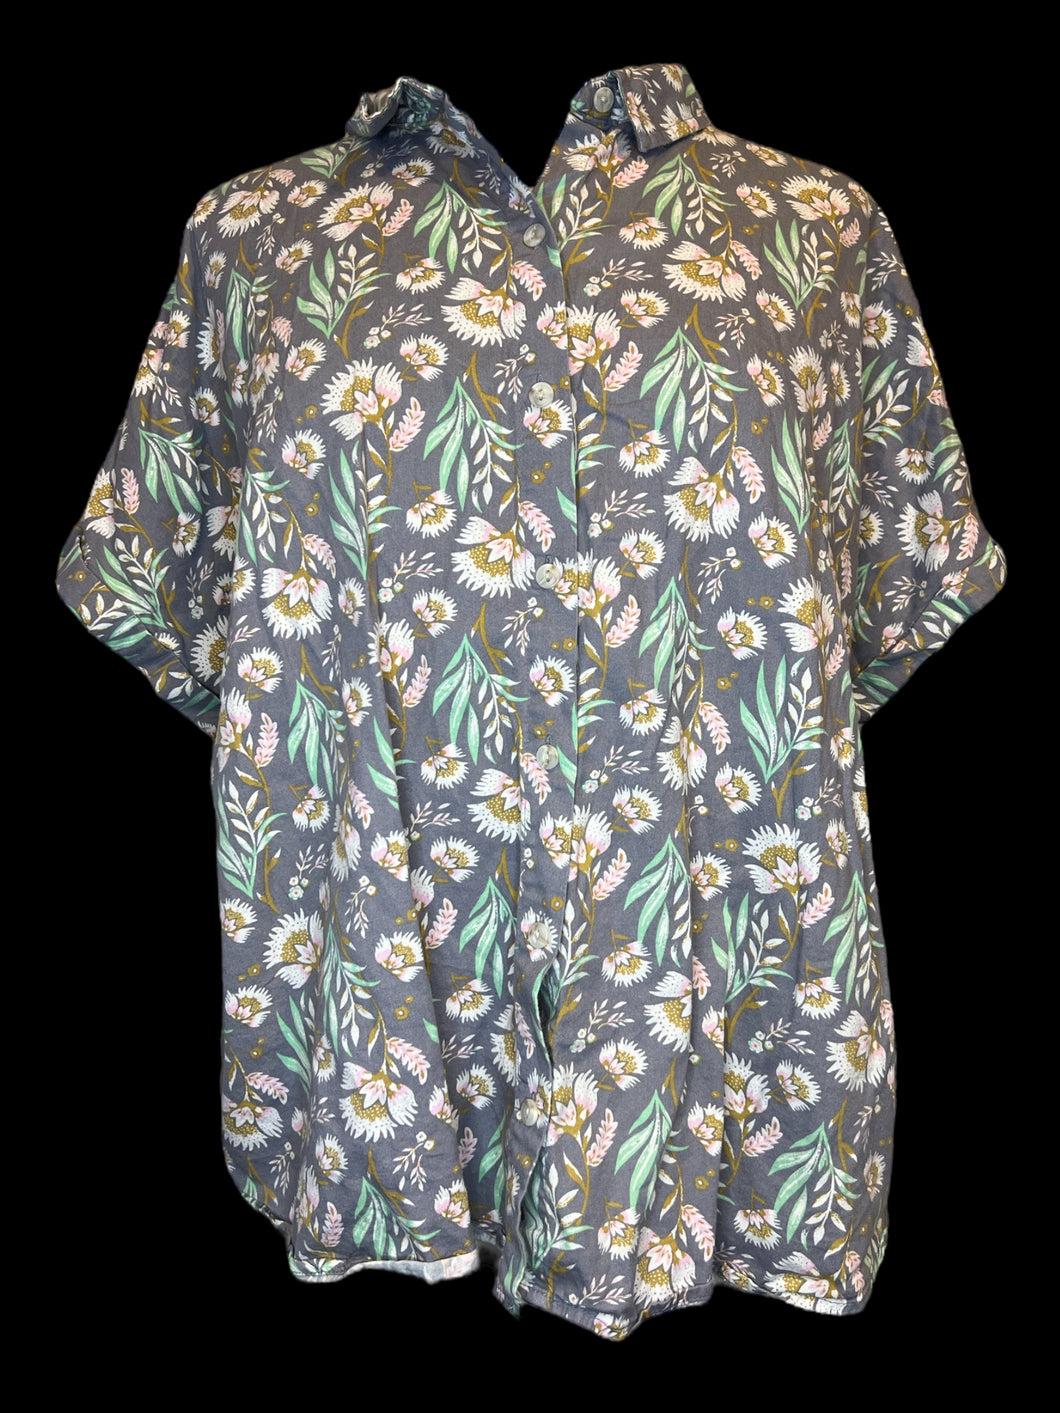 2X Light grey short sleeve button-up top w/ floral pattern